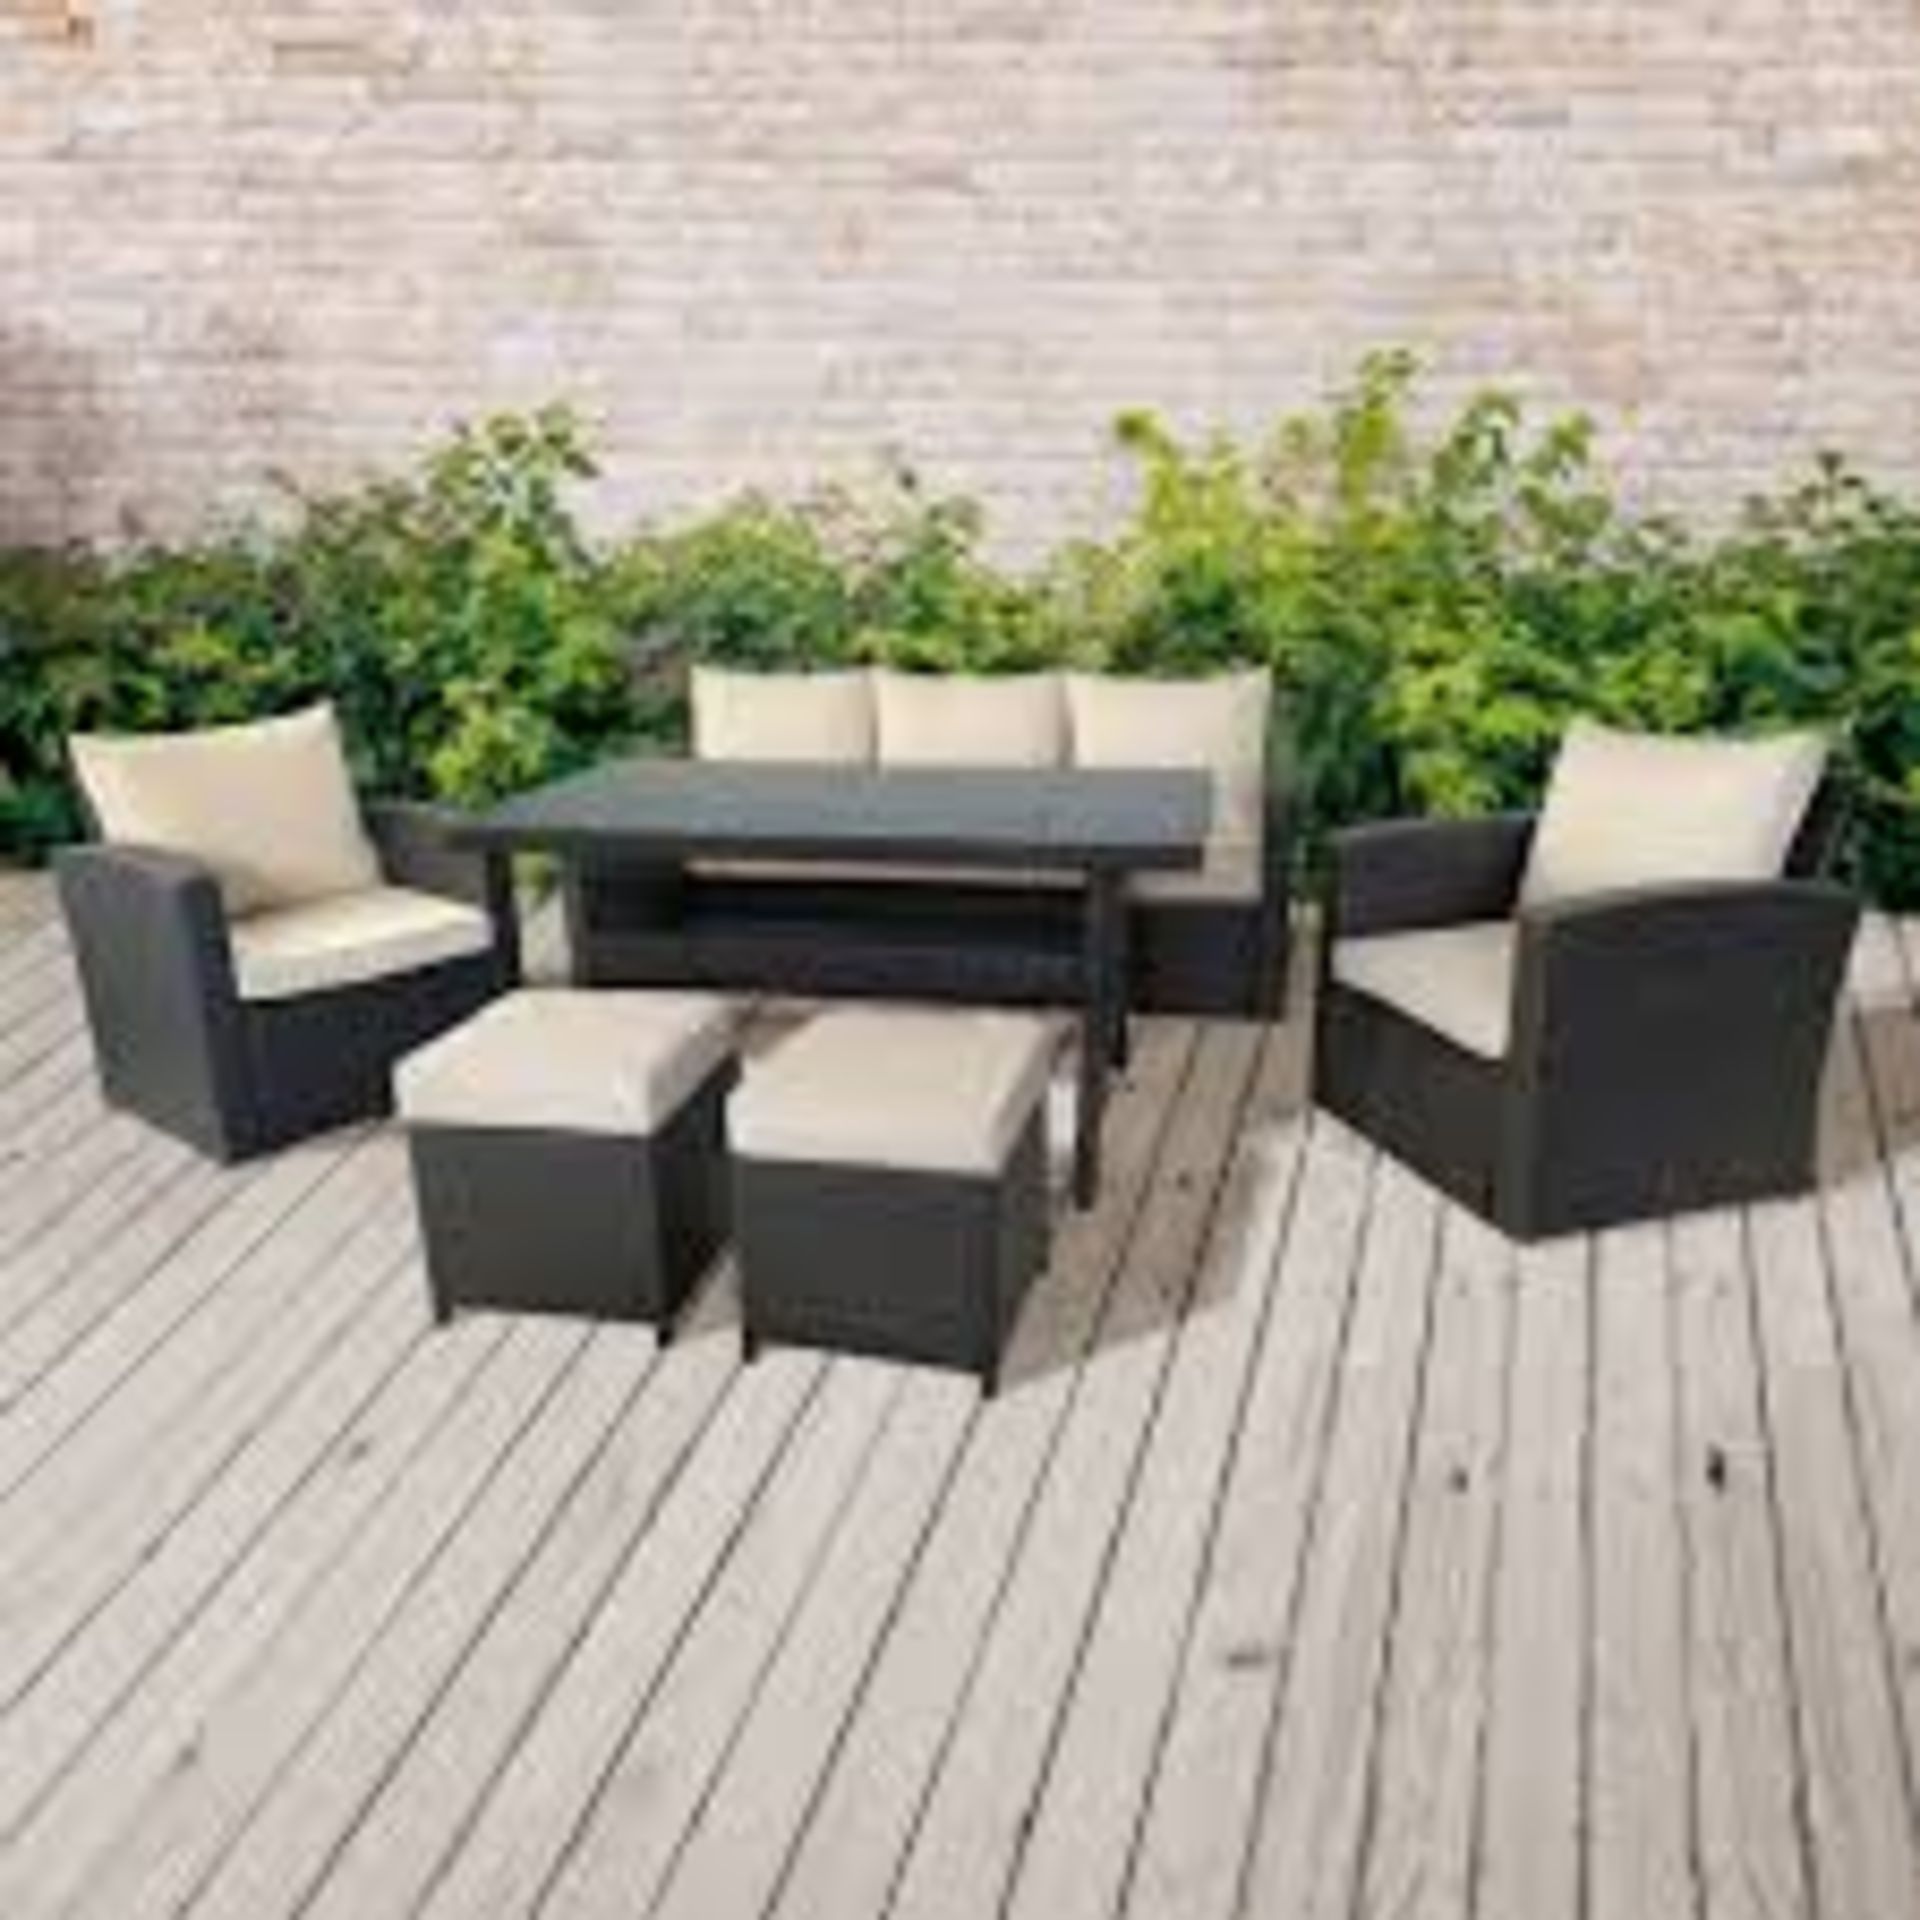 ATLANTA 6 PIECE RATTAN DINING SET WITH SOFT REMOVABLE CUSHIONS FOR HIGH LEVEL COMFORT, STRONG AND